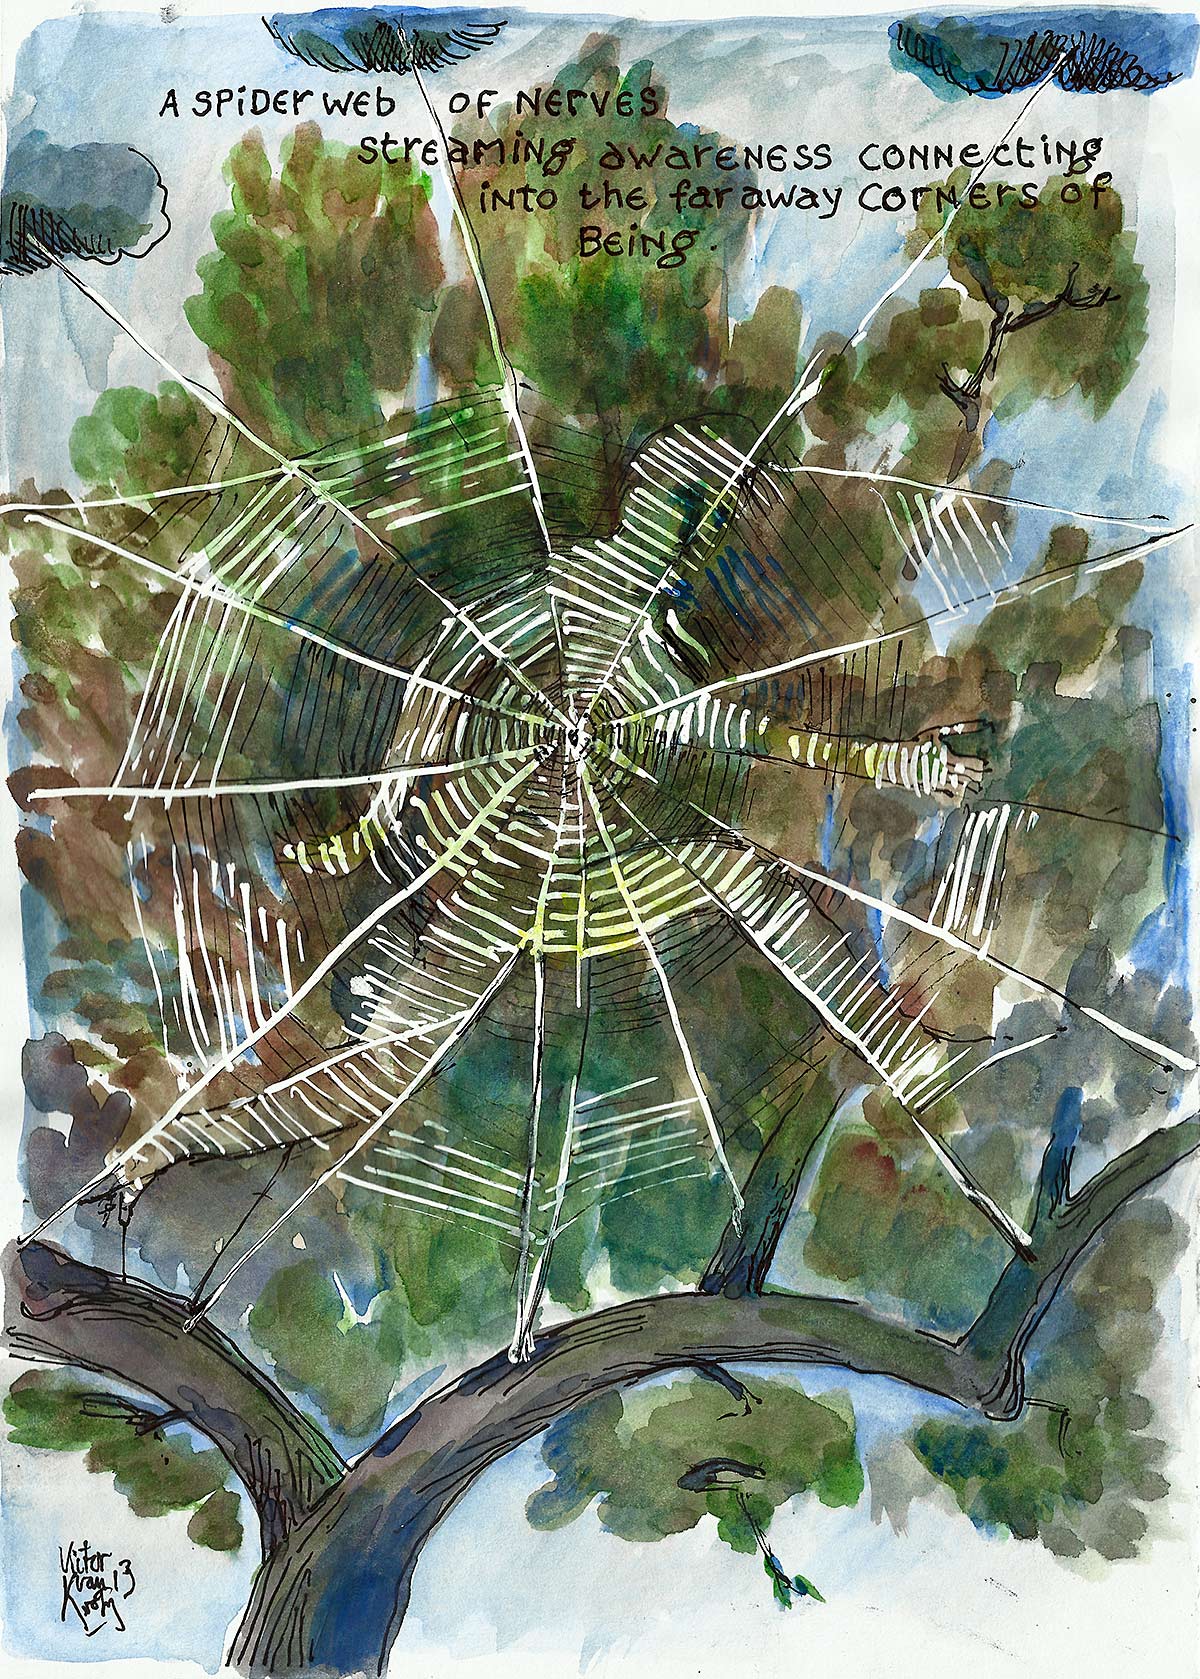 A spiderweb of nerves streaming awareness connecting into the faraway corners of being.